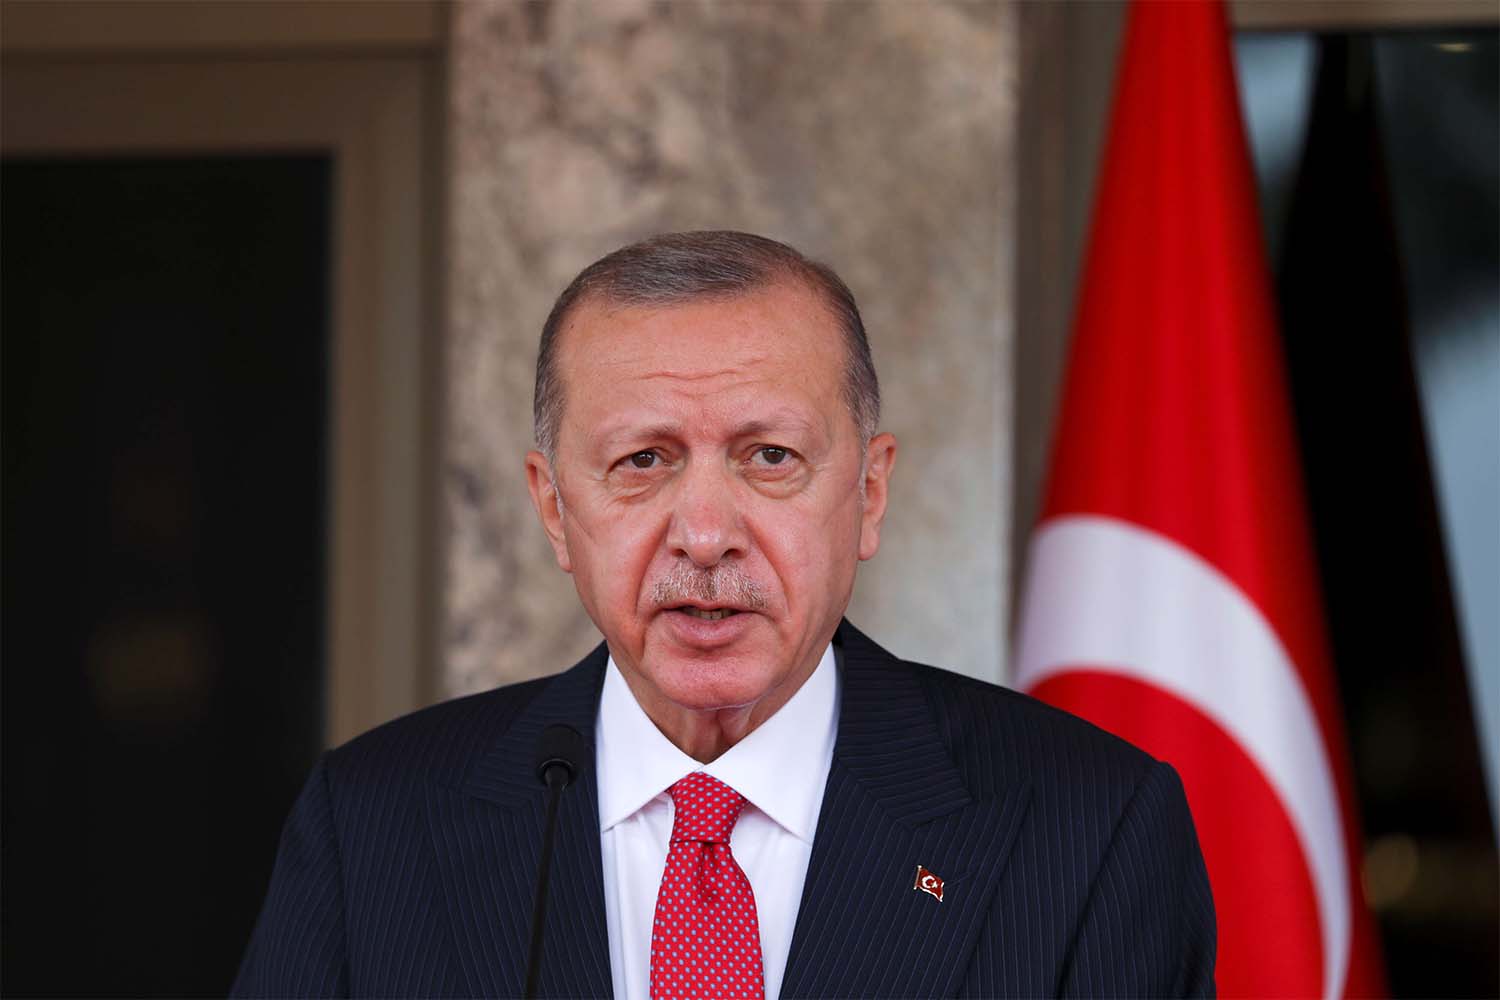 Polls show support for Erdogan falling ahead of 2023 elections